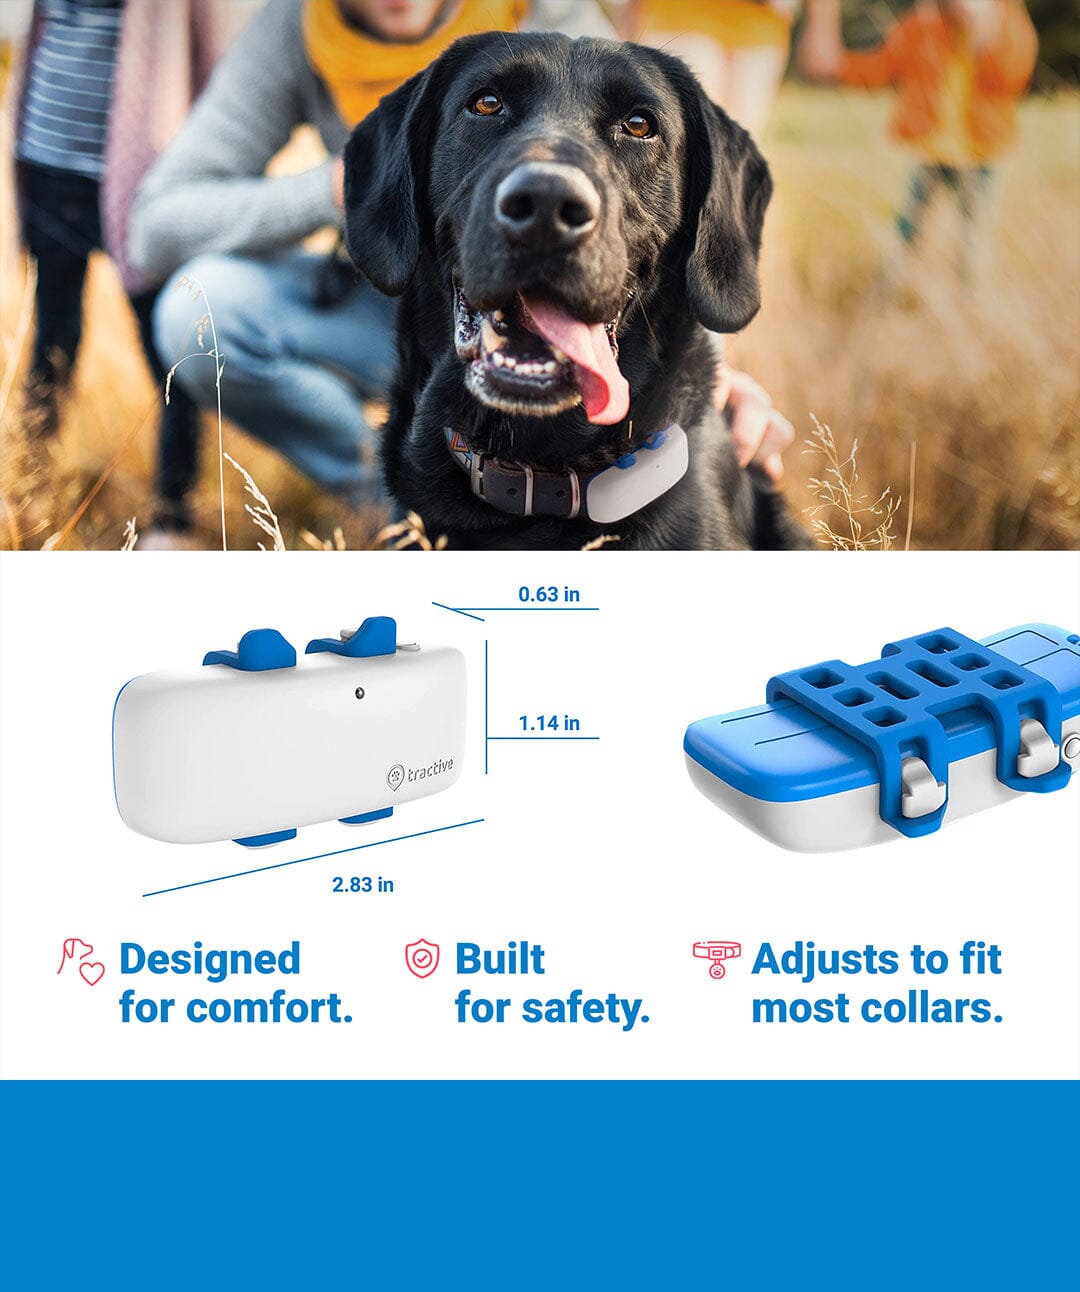 Tractive GPS Tracker for Cats and Dogs